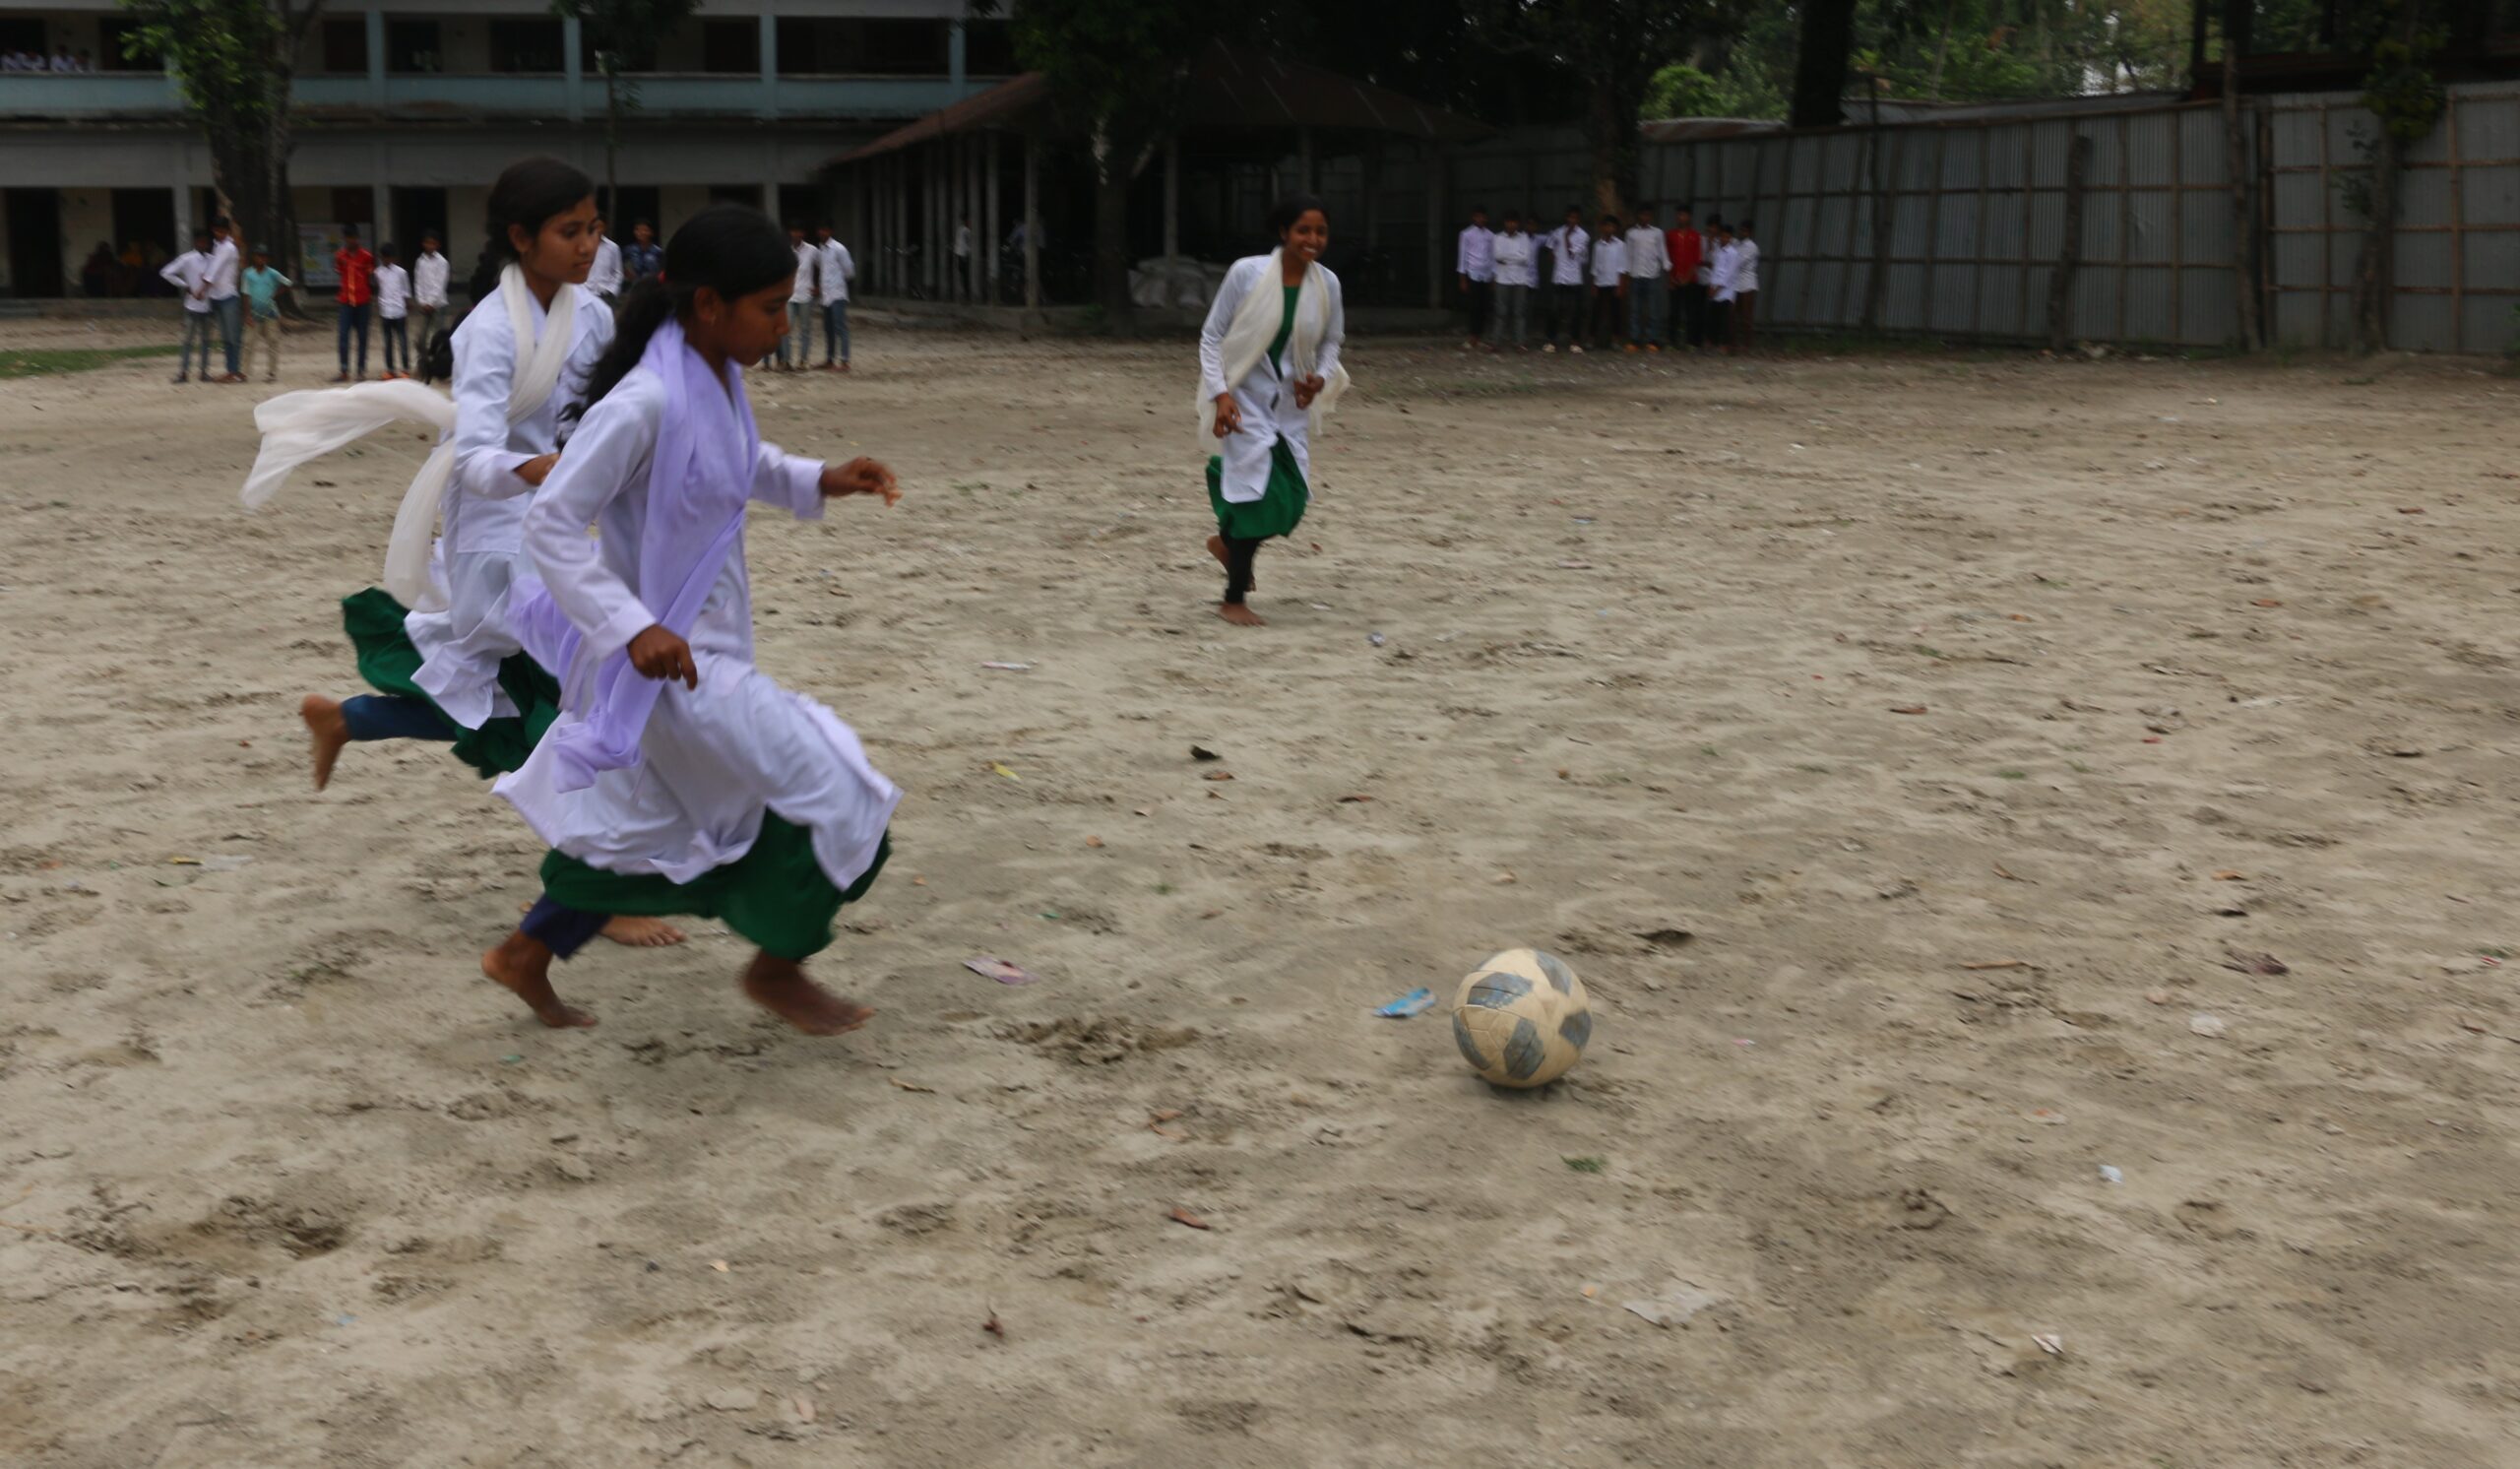 Lila is playing football with others © Plan International